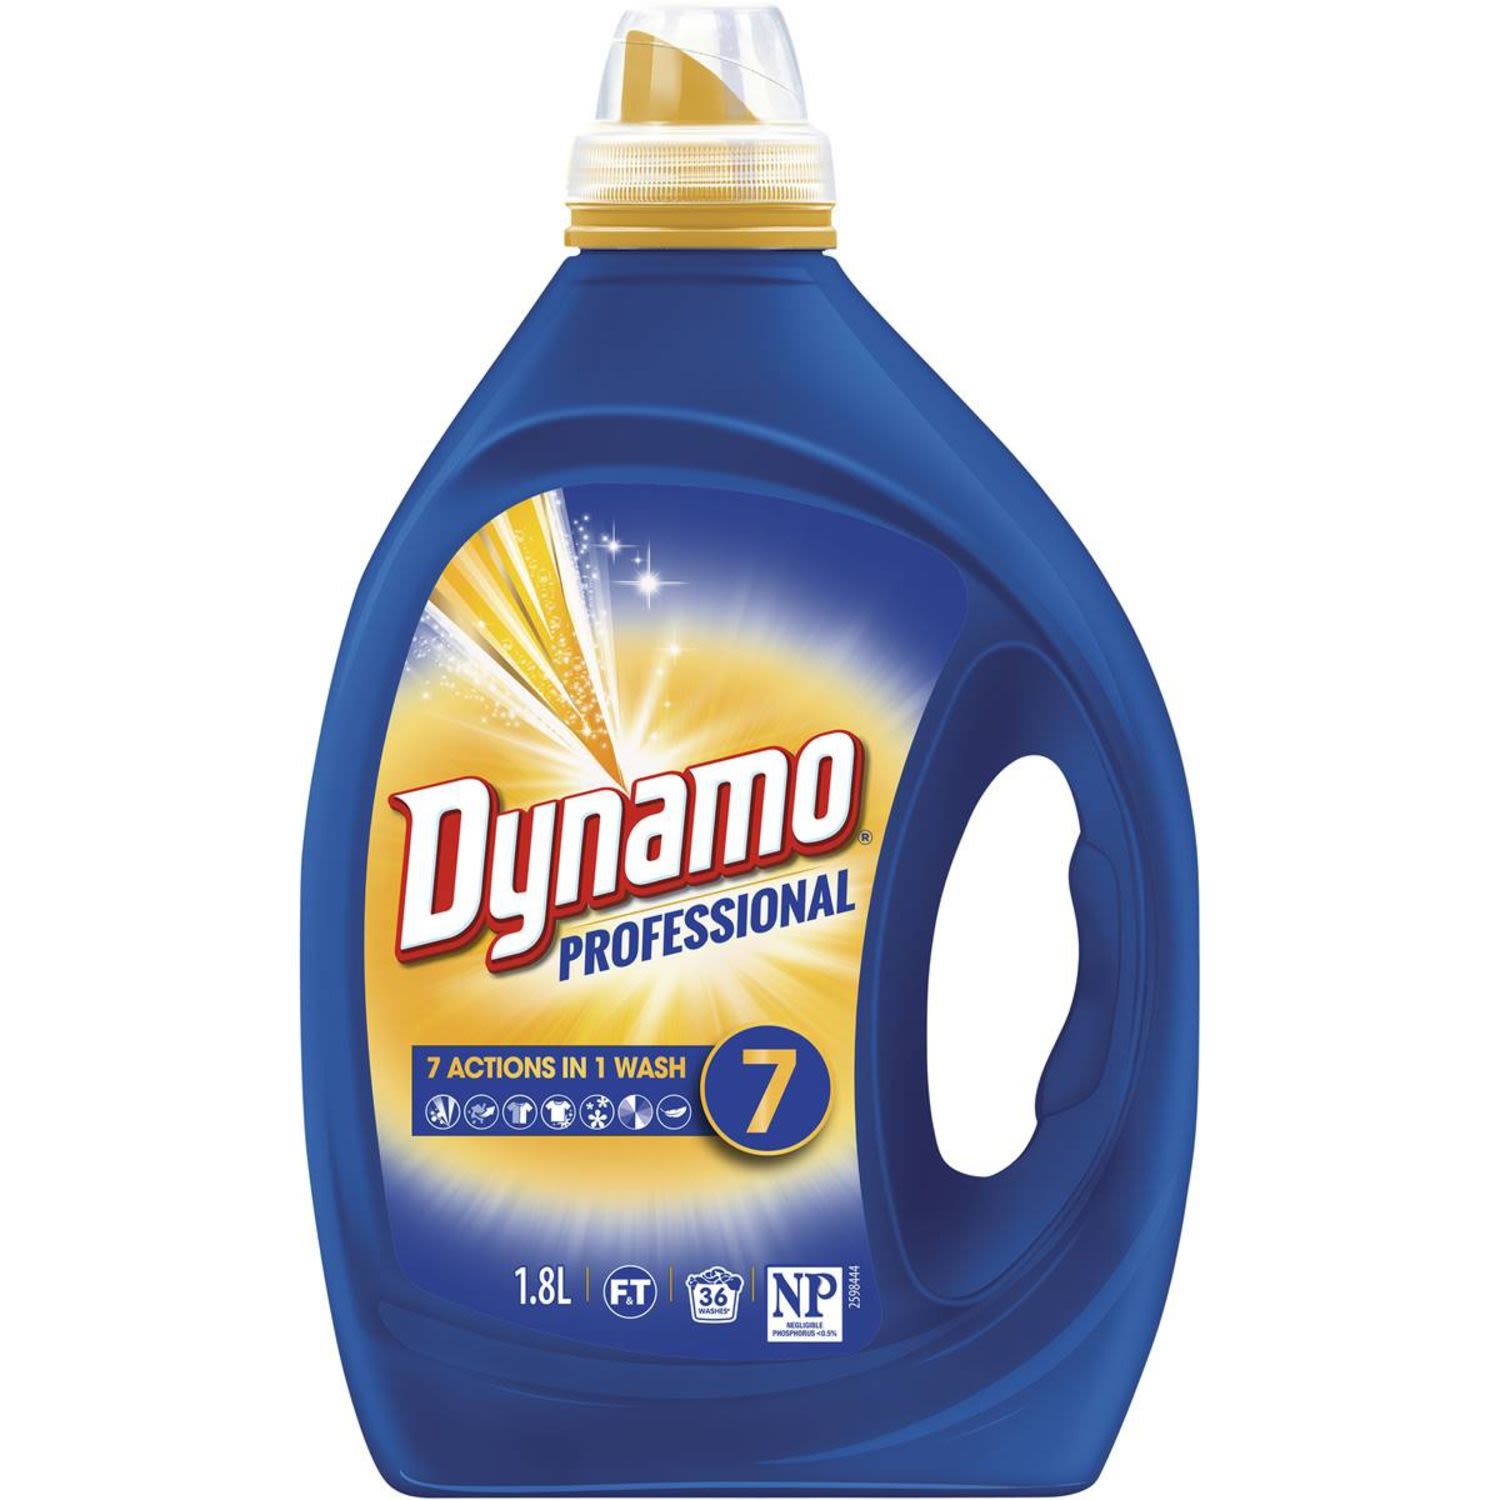 Looking for an all-in-one shop? CHOICE RECOMMENDED Dynamo Professional 7 in 1 provides you with 7 Actions in 1 Wash: Its advanced formula with a unqique blend of active ingredients provides you with tough stain removal, thorough deep clean, whitening, brightening, clean & fresh scent, vibrant colours and fabric care - all in one wash! Dynamo Professional - superior results first time! Suitable for front & top loader washing machines. Dynamo Professional tackles even the toughest stains: Oil & grease, grassy stains, mud, tomato-based stains, coffee, cuff & collar grime, perspiration and red wine are no challenge when using Dynamo. Rub a little on the stain and the rest in the wash for best results. Visits Dynamo.com.au for specific stain solutions *Choice recommended 2020<br /> <br />